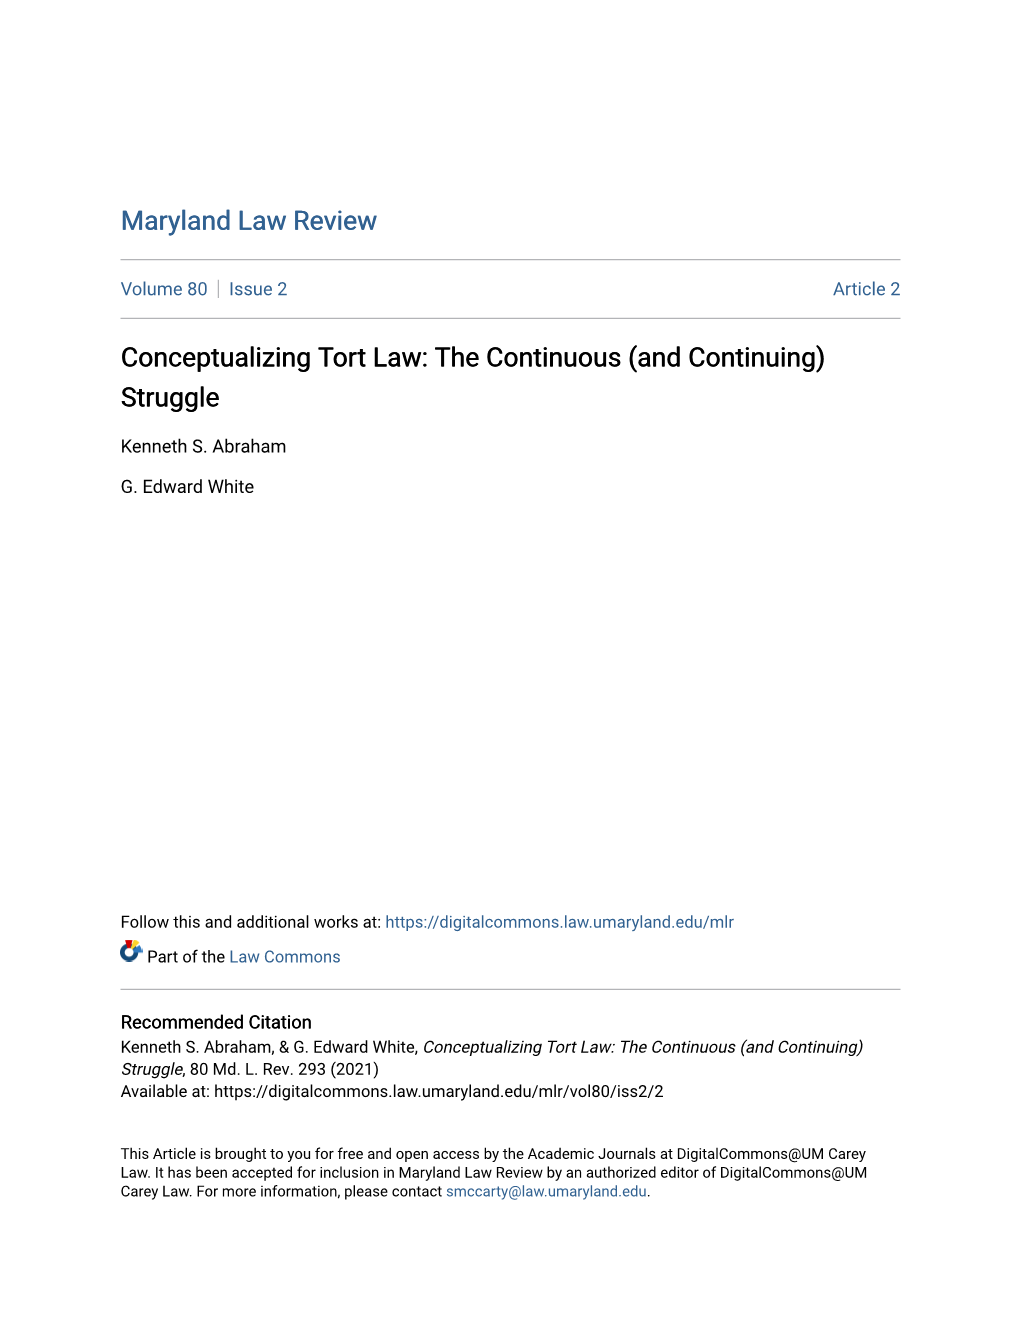 Conceptualizing Tort Law: the Continuous (And Continuing) Struggle